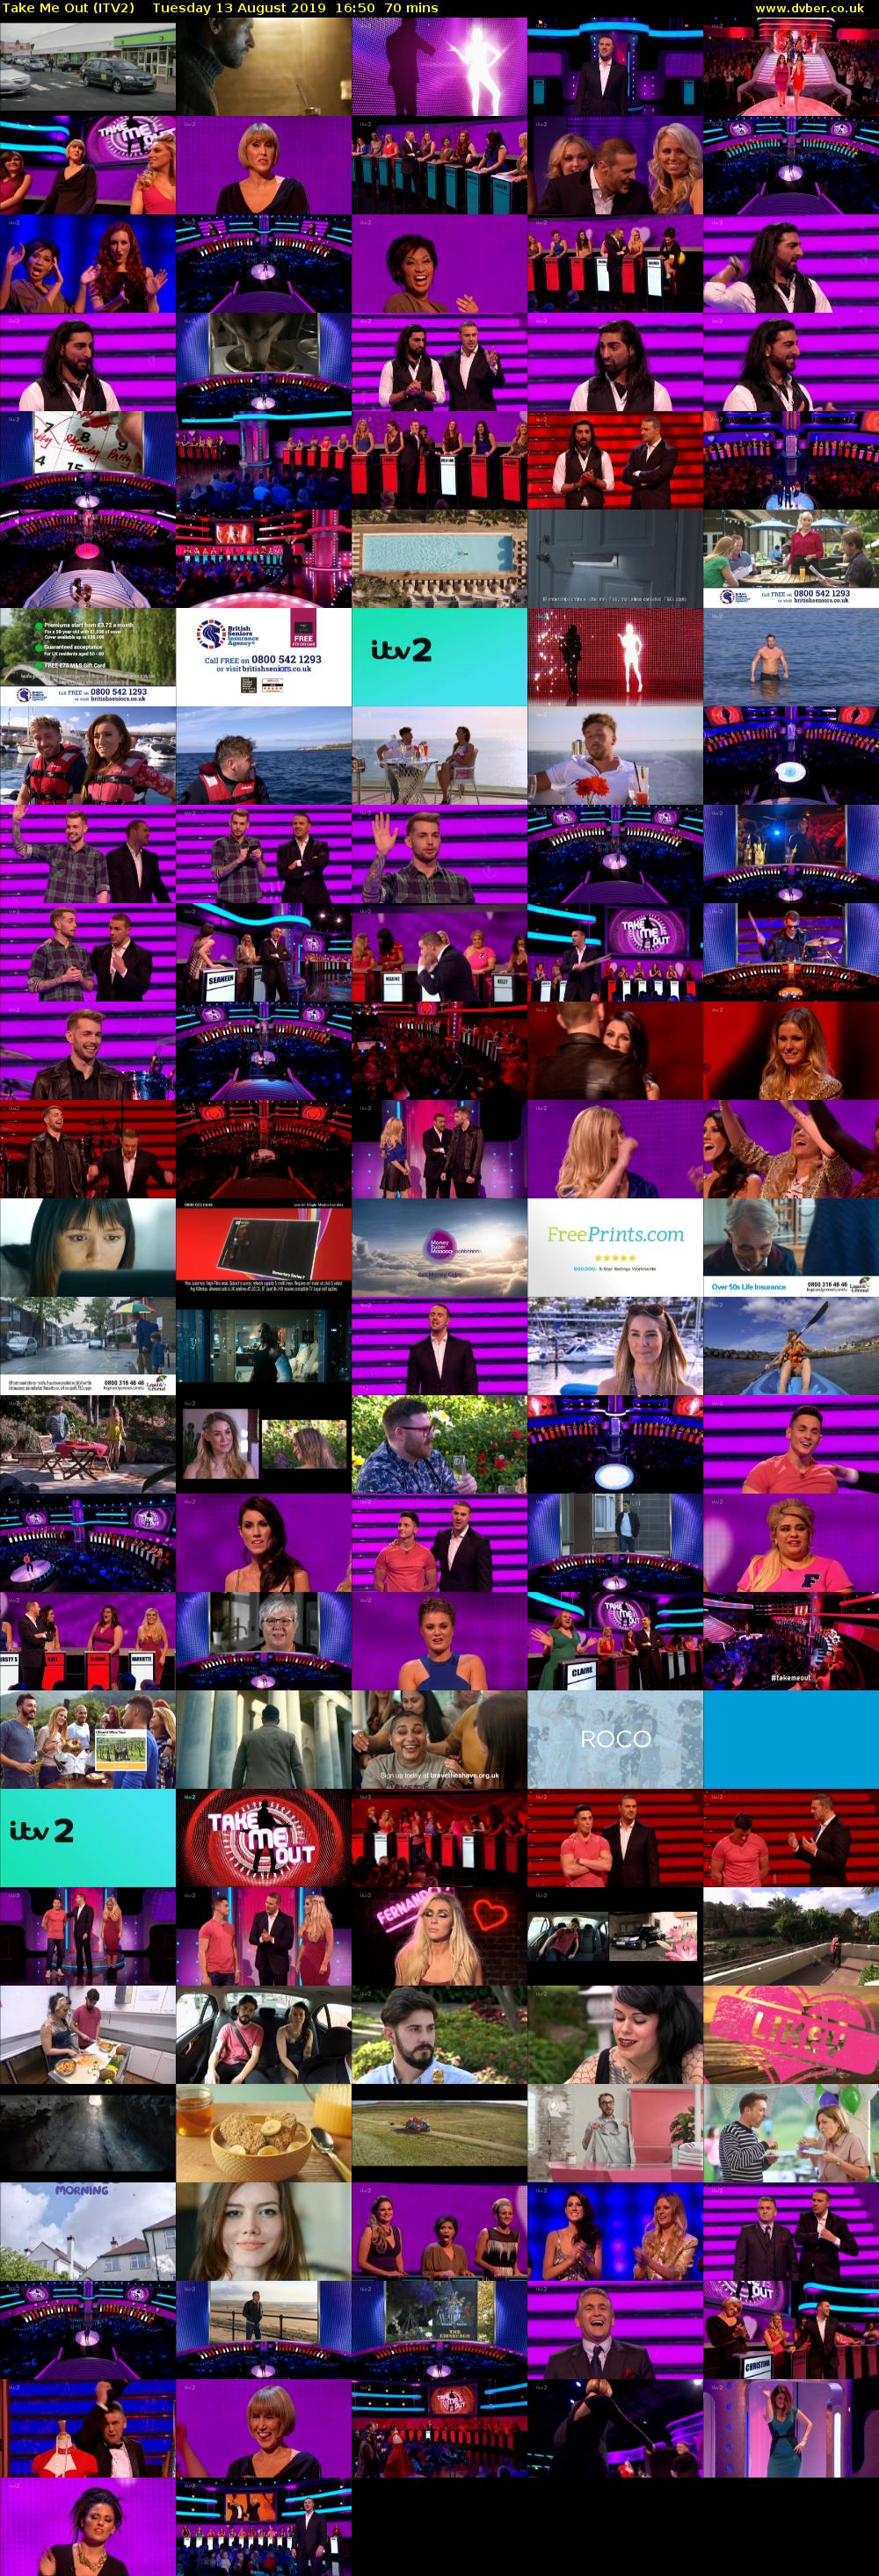 Take Me Out (ITV2) Tuesday 13 August 2019 16:50 - 18:00